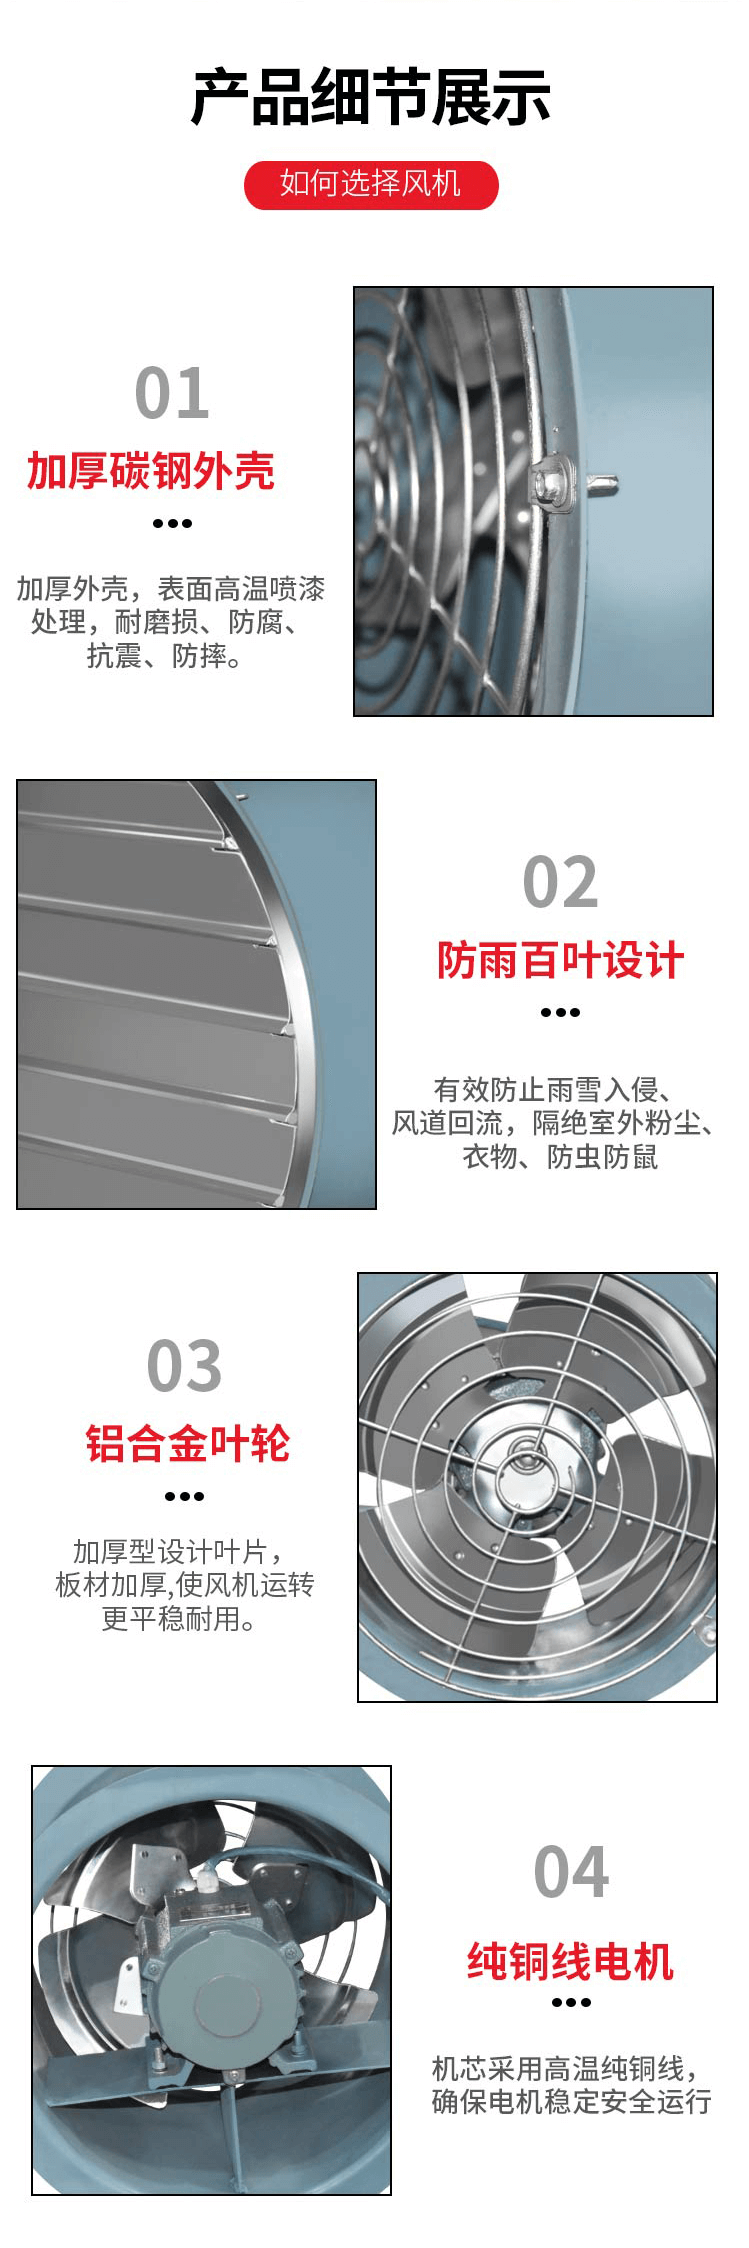 T35-11轴流风机_07.png